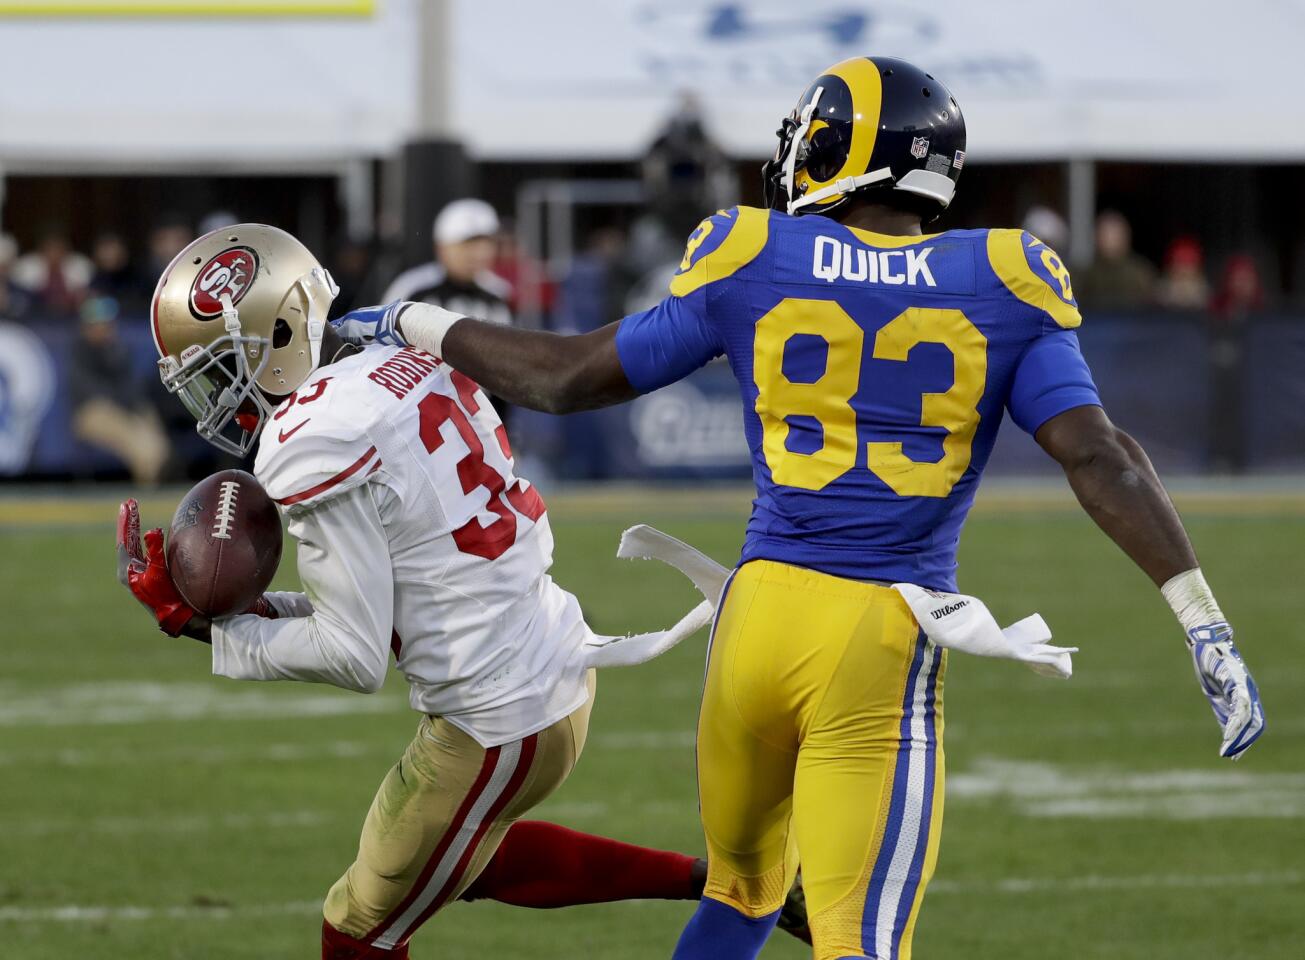 San Francisco 49ers cornerback Rashard Robinson, left, intercepts a pass intended for Los Angeles Rams wide receiver Brian Quick during the second half of an NFL football game Saturday, Dec. 24, 2016, in Los Angeles. (AP Photo/Rick Scuteri)